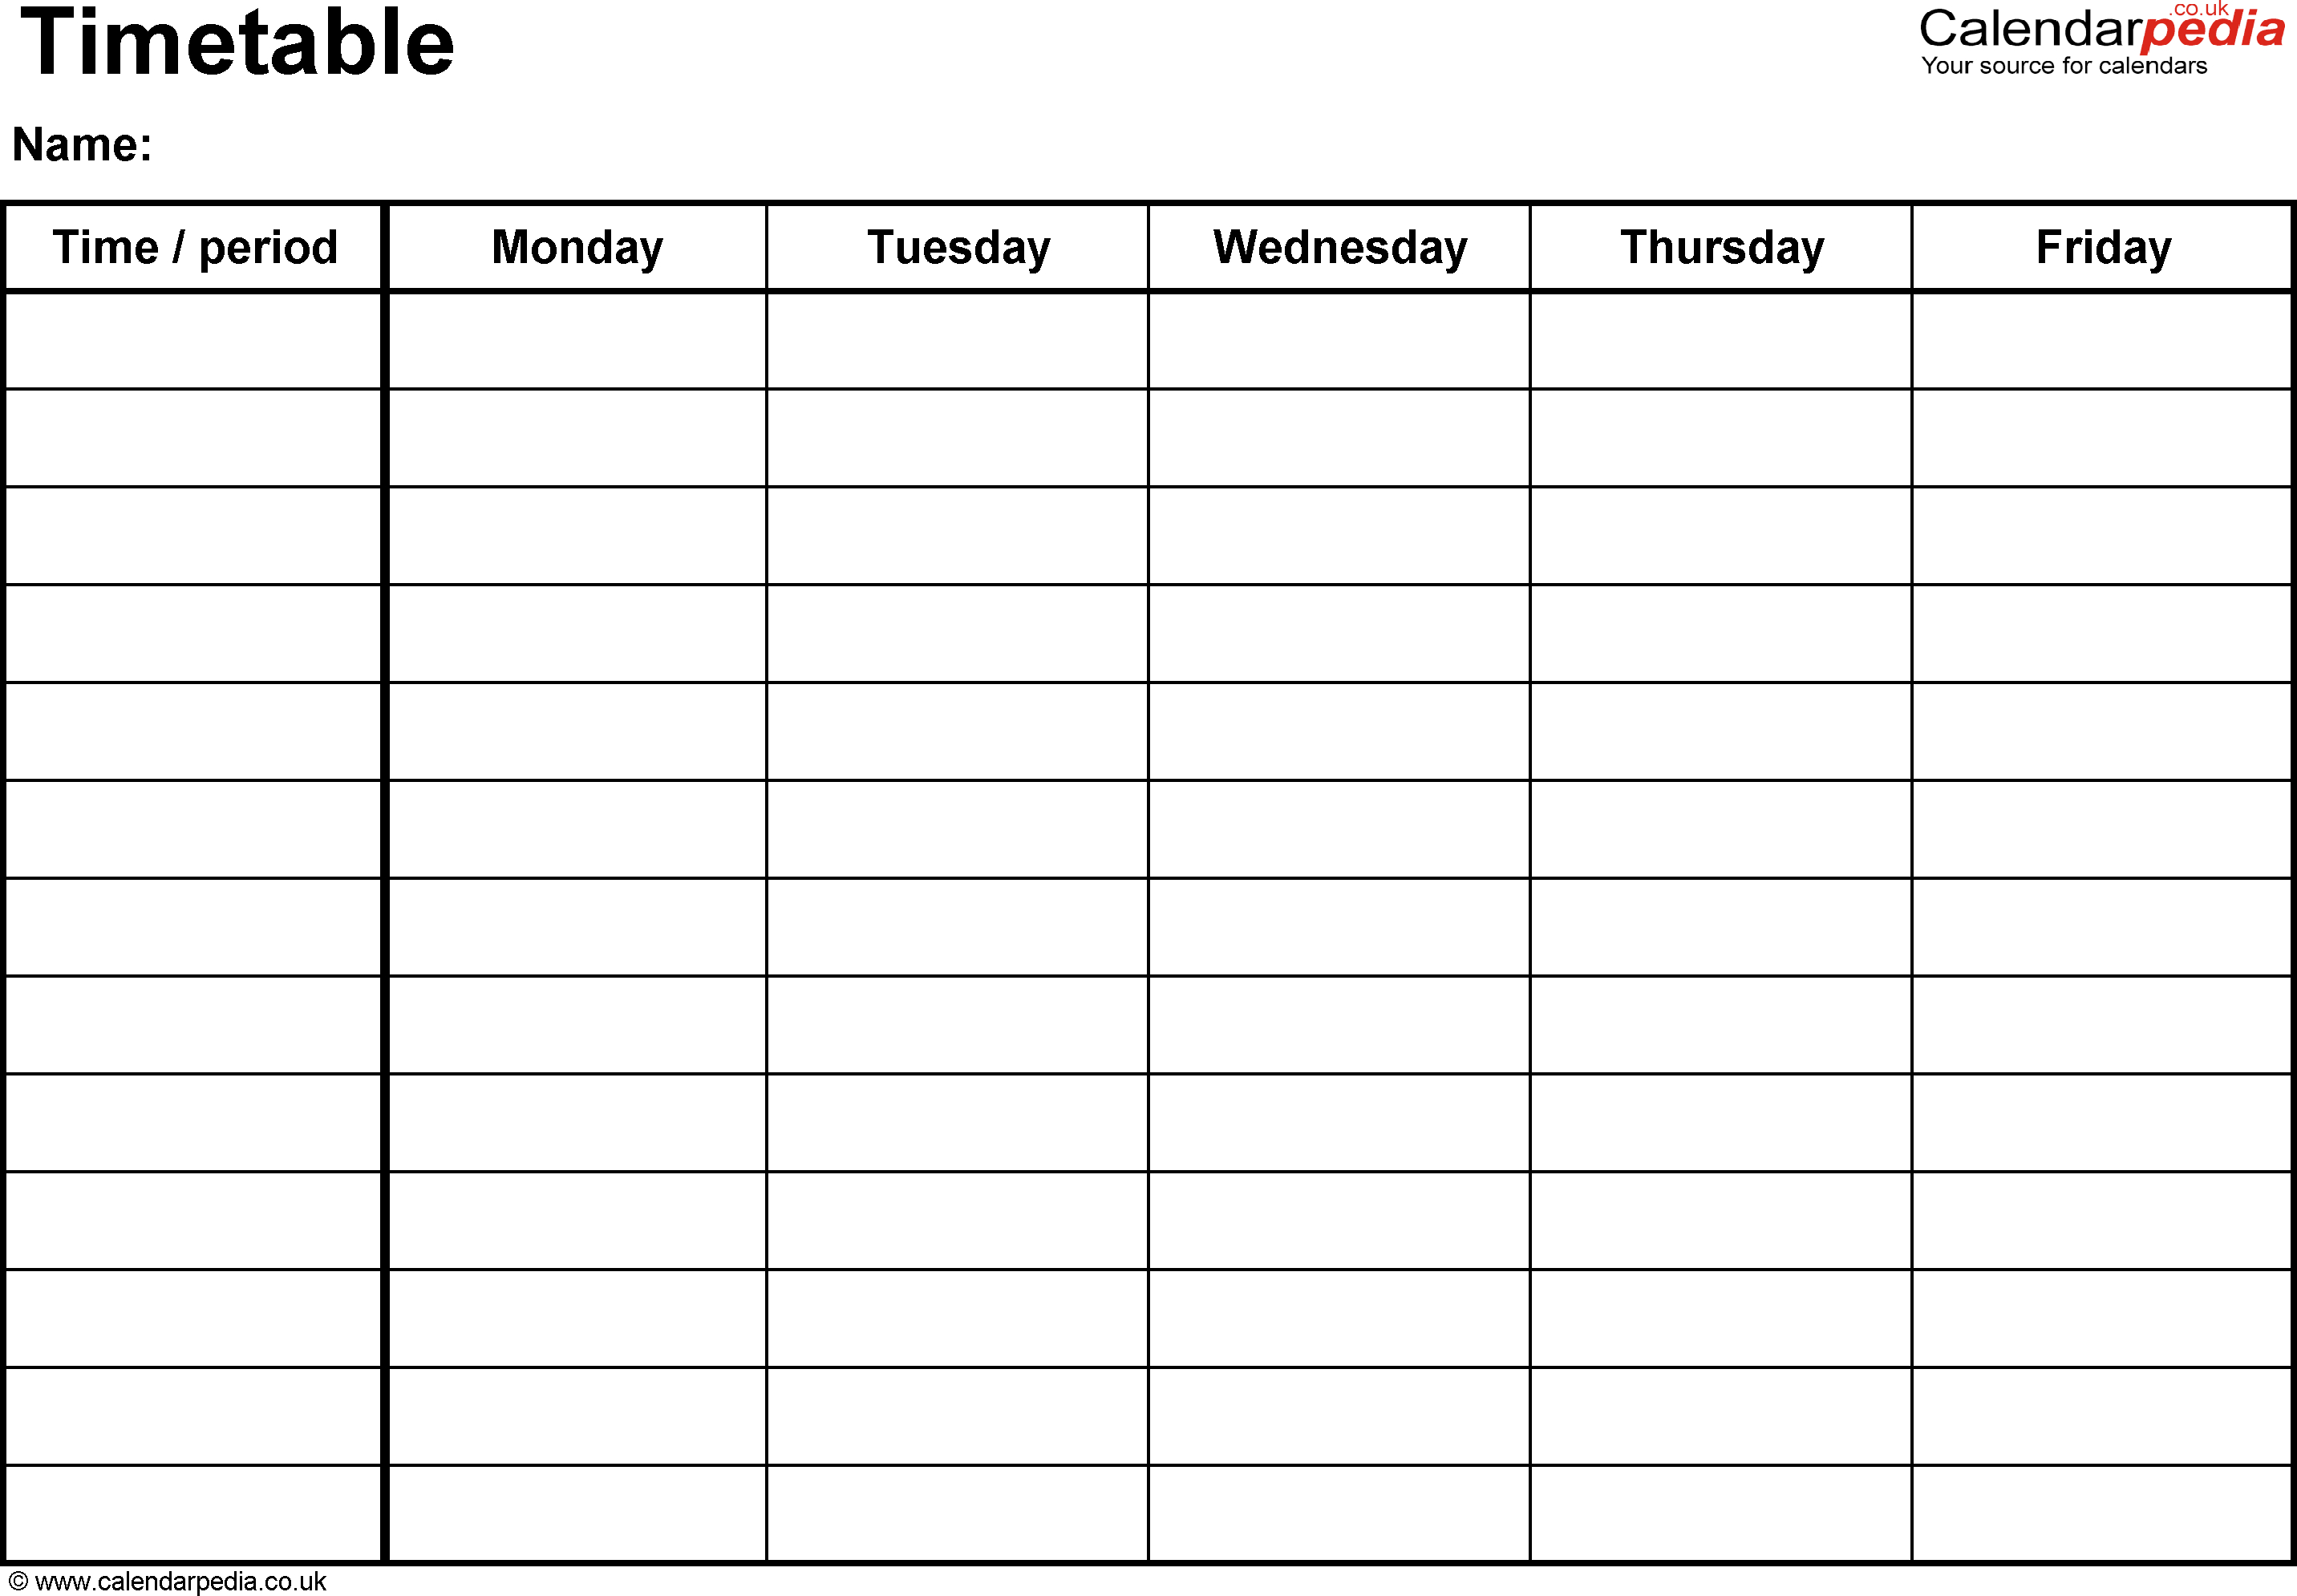 Excel Timetable Template 1: Landscape Format, A4, 1 Page with regard to Free Printable 5 Day Calendar